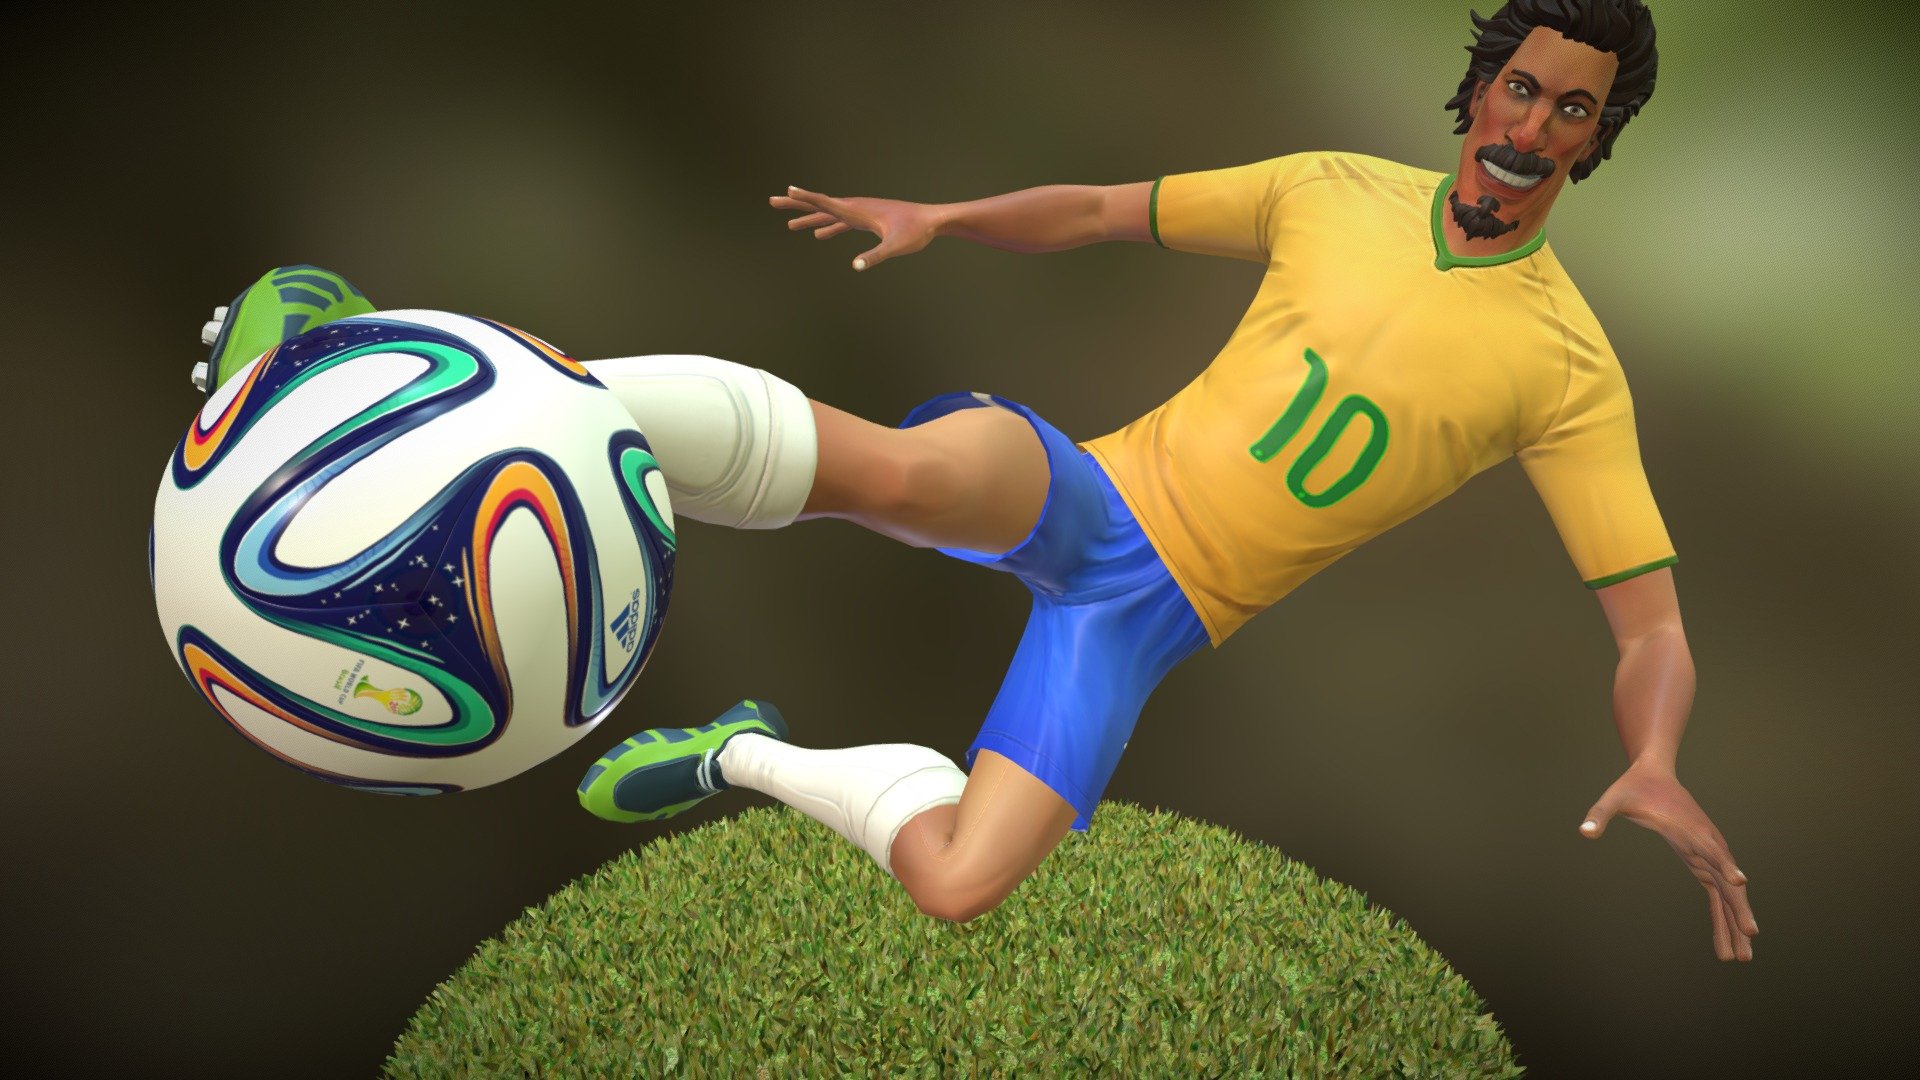 in 2014 I worked in an augmented reality project for Coca-Cola and the Brazilian producer Koi Factory, which recreated a football match for the events of the World Cup the same year. The character above is one of the players who are in the animation. I worked mainly on modeling of character in ZBrush.

For the full information: http://koifactory.com/ - Coca-Cola / Oculos 360 - Character - 3D model by hugobmq 3d model